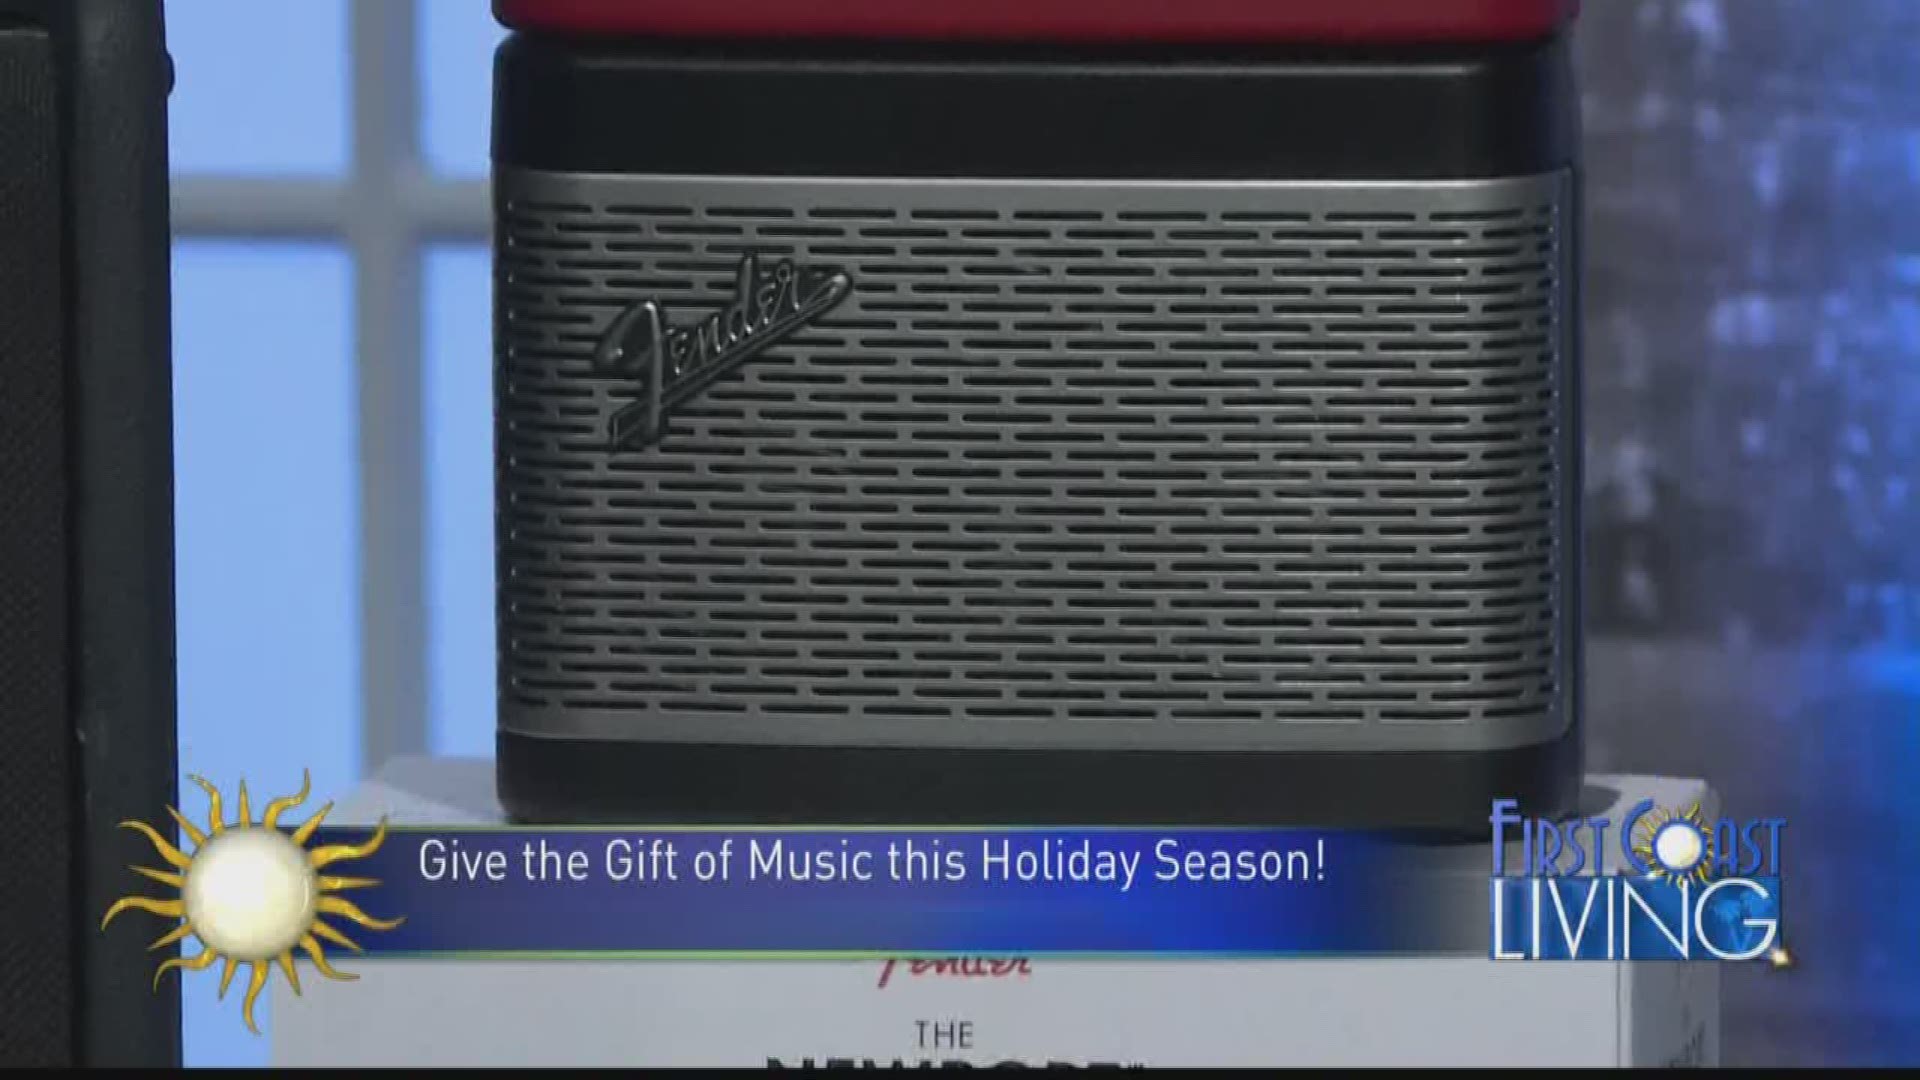 Still stuck on what to give loved ones for the holidays? Try giving the gift of music.